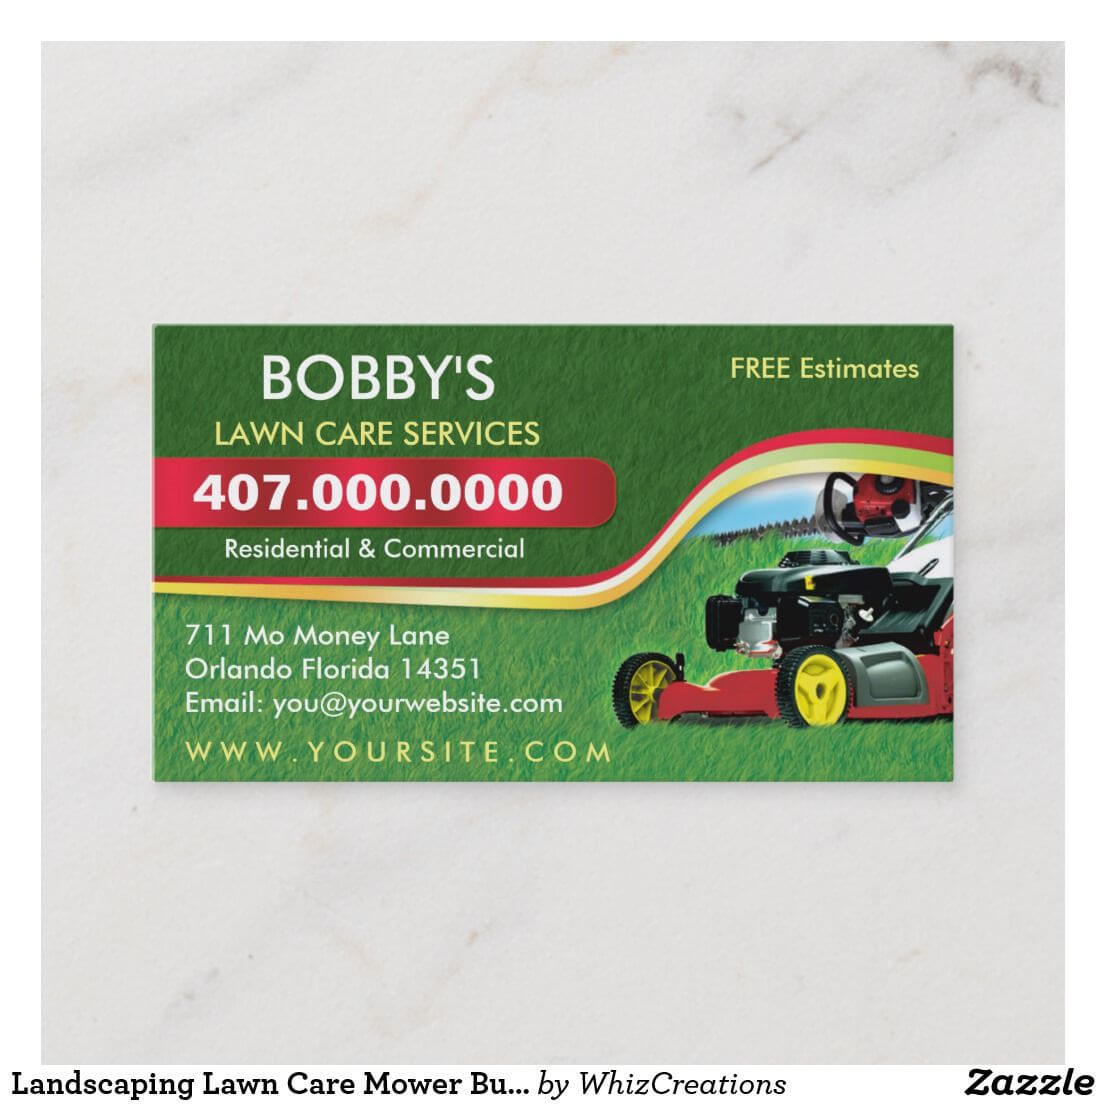 Landscaping Lawn Care Mower Business Card Template | Zazzle Throughout Lawn Care Business Cards Templates Free